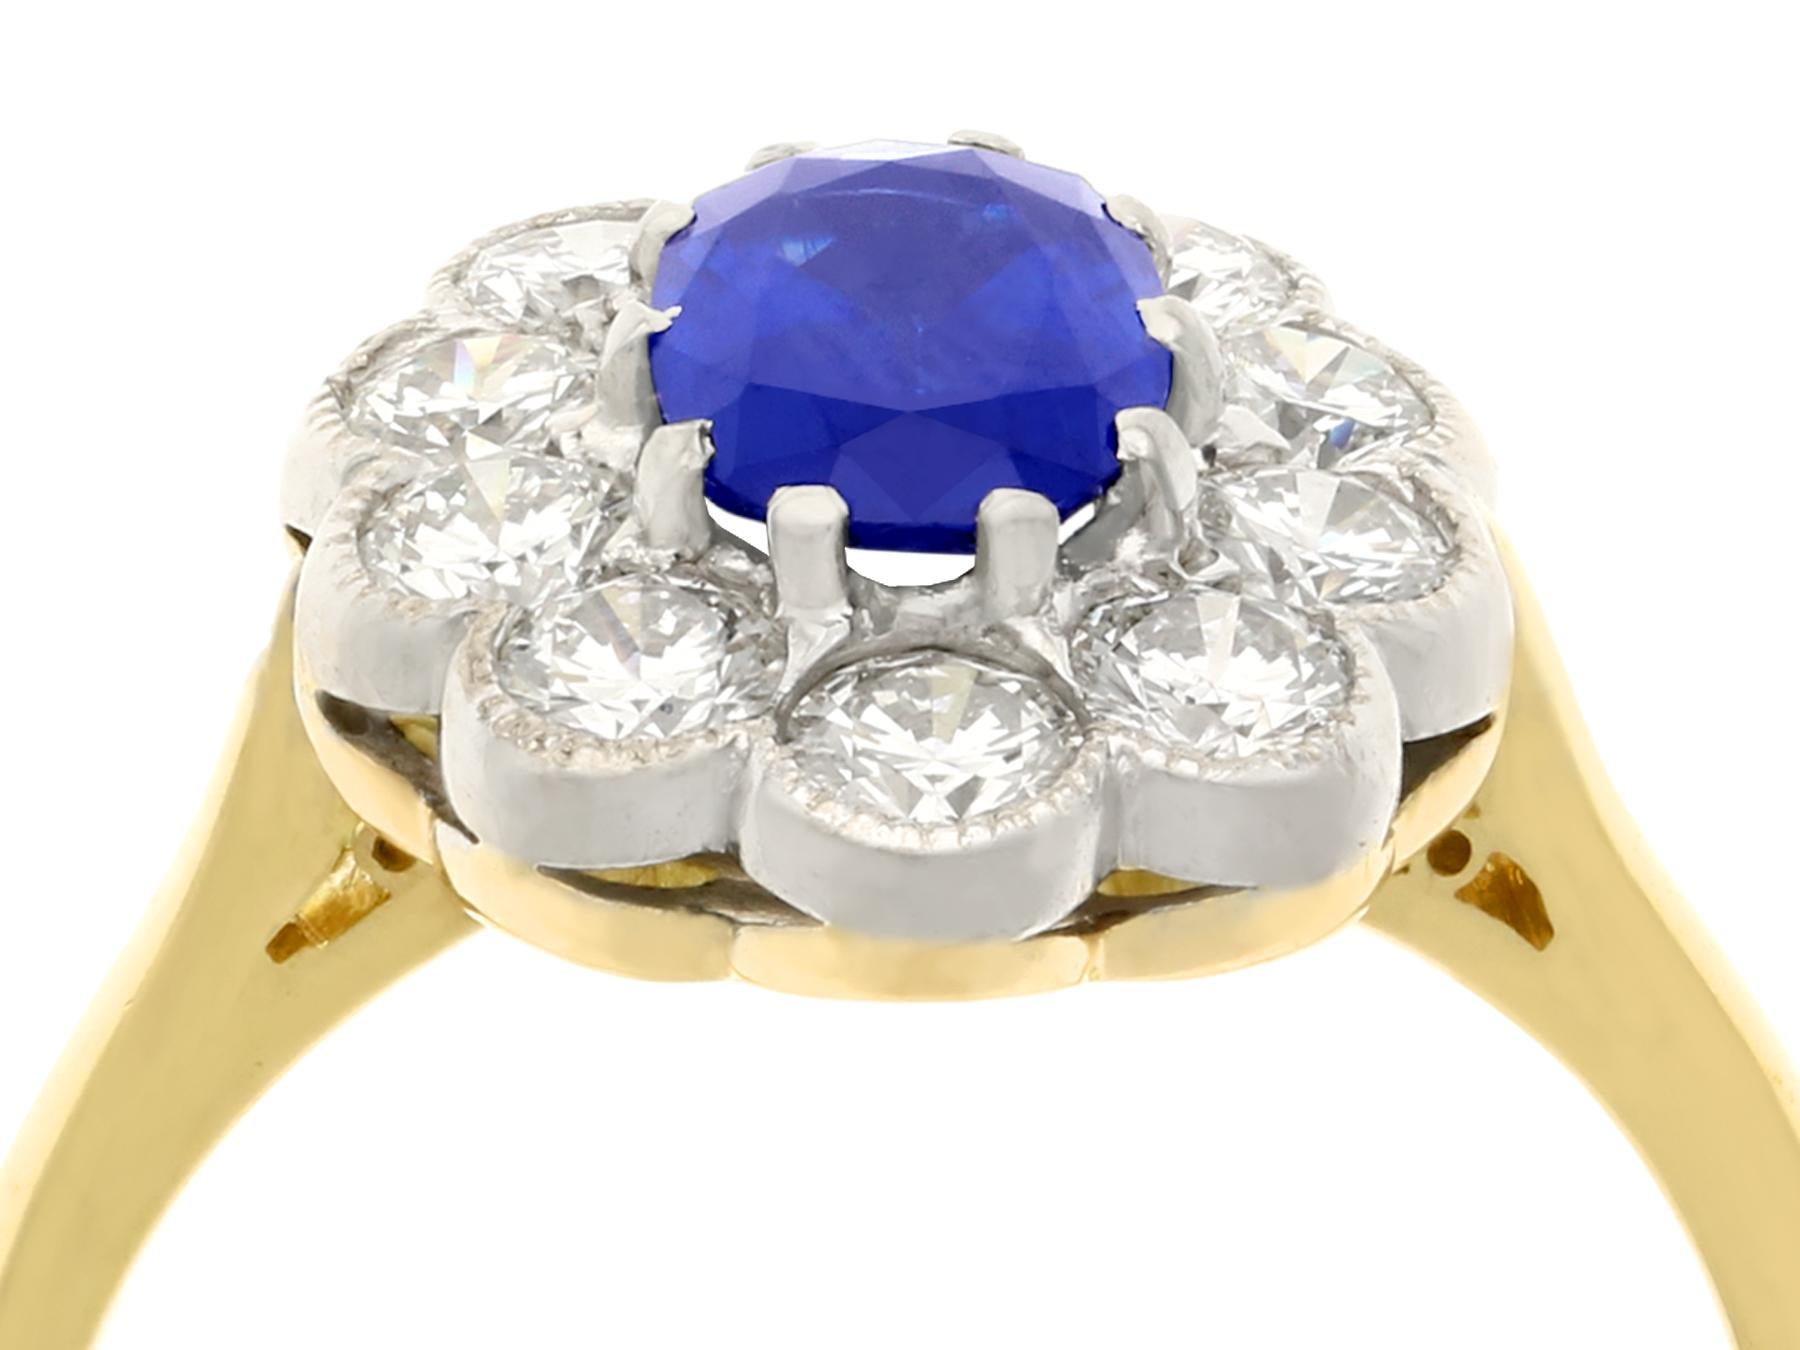 A stunning vintage 1.28 carat sapphire and 1.30 carat diamond, 18 karat yellow and white gold cluster ring; part of our diverse gemstone jewelry and estate jewelry collections.

This stunning, fine and impressive vintage sapphire and diamond ring